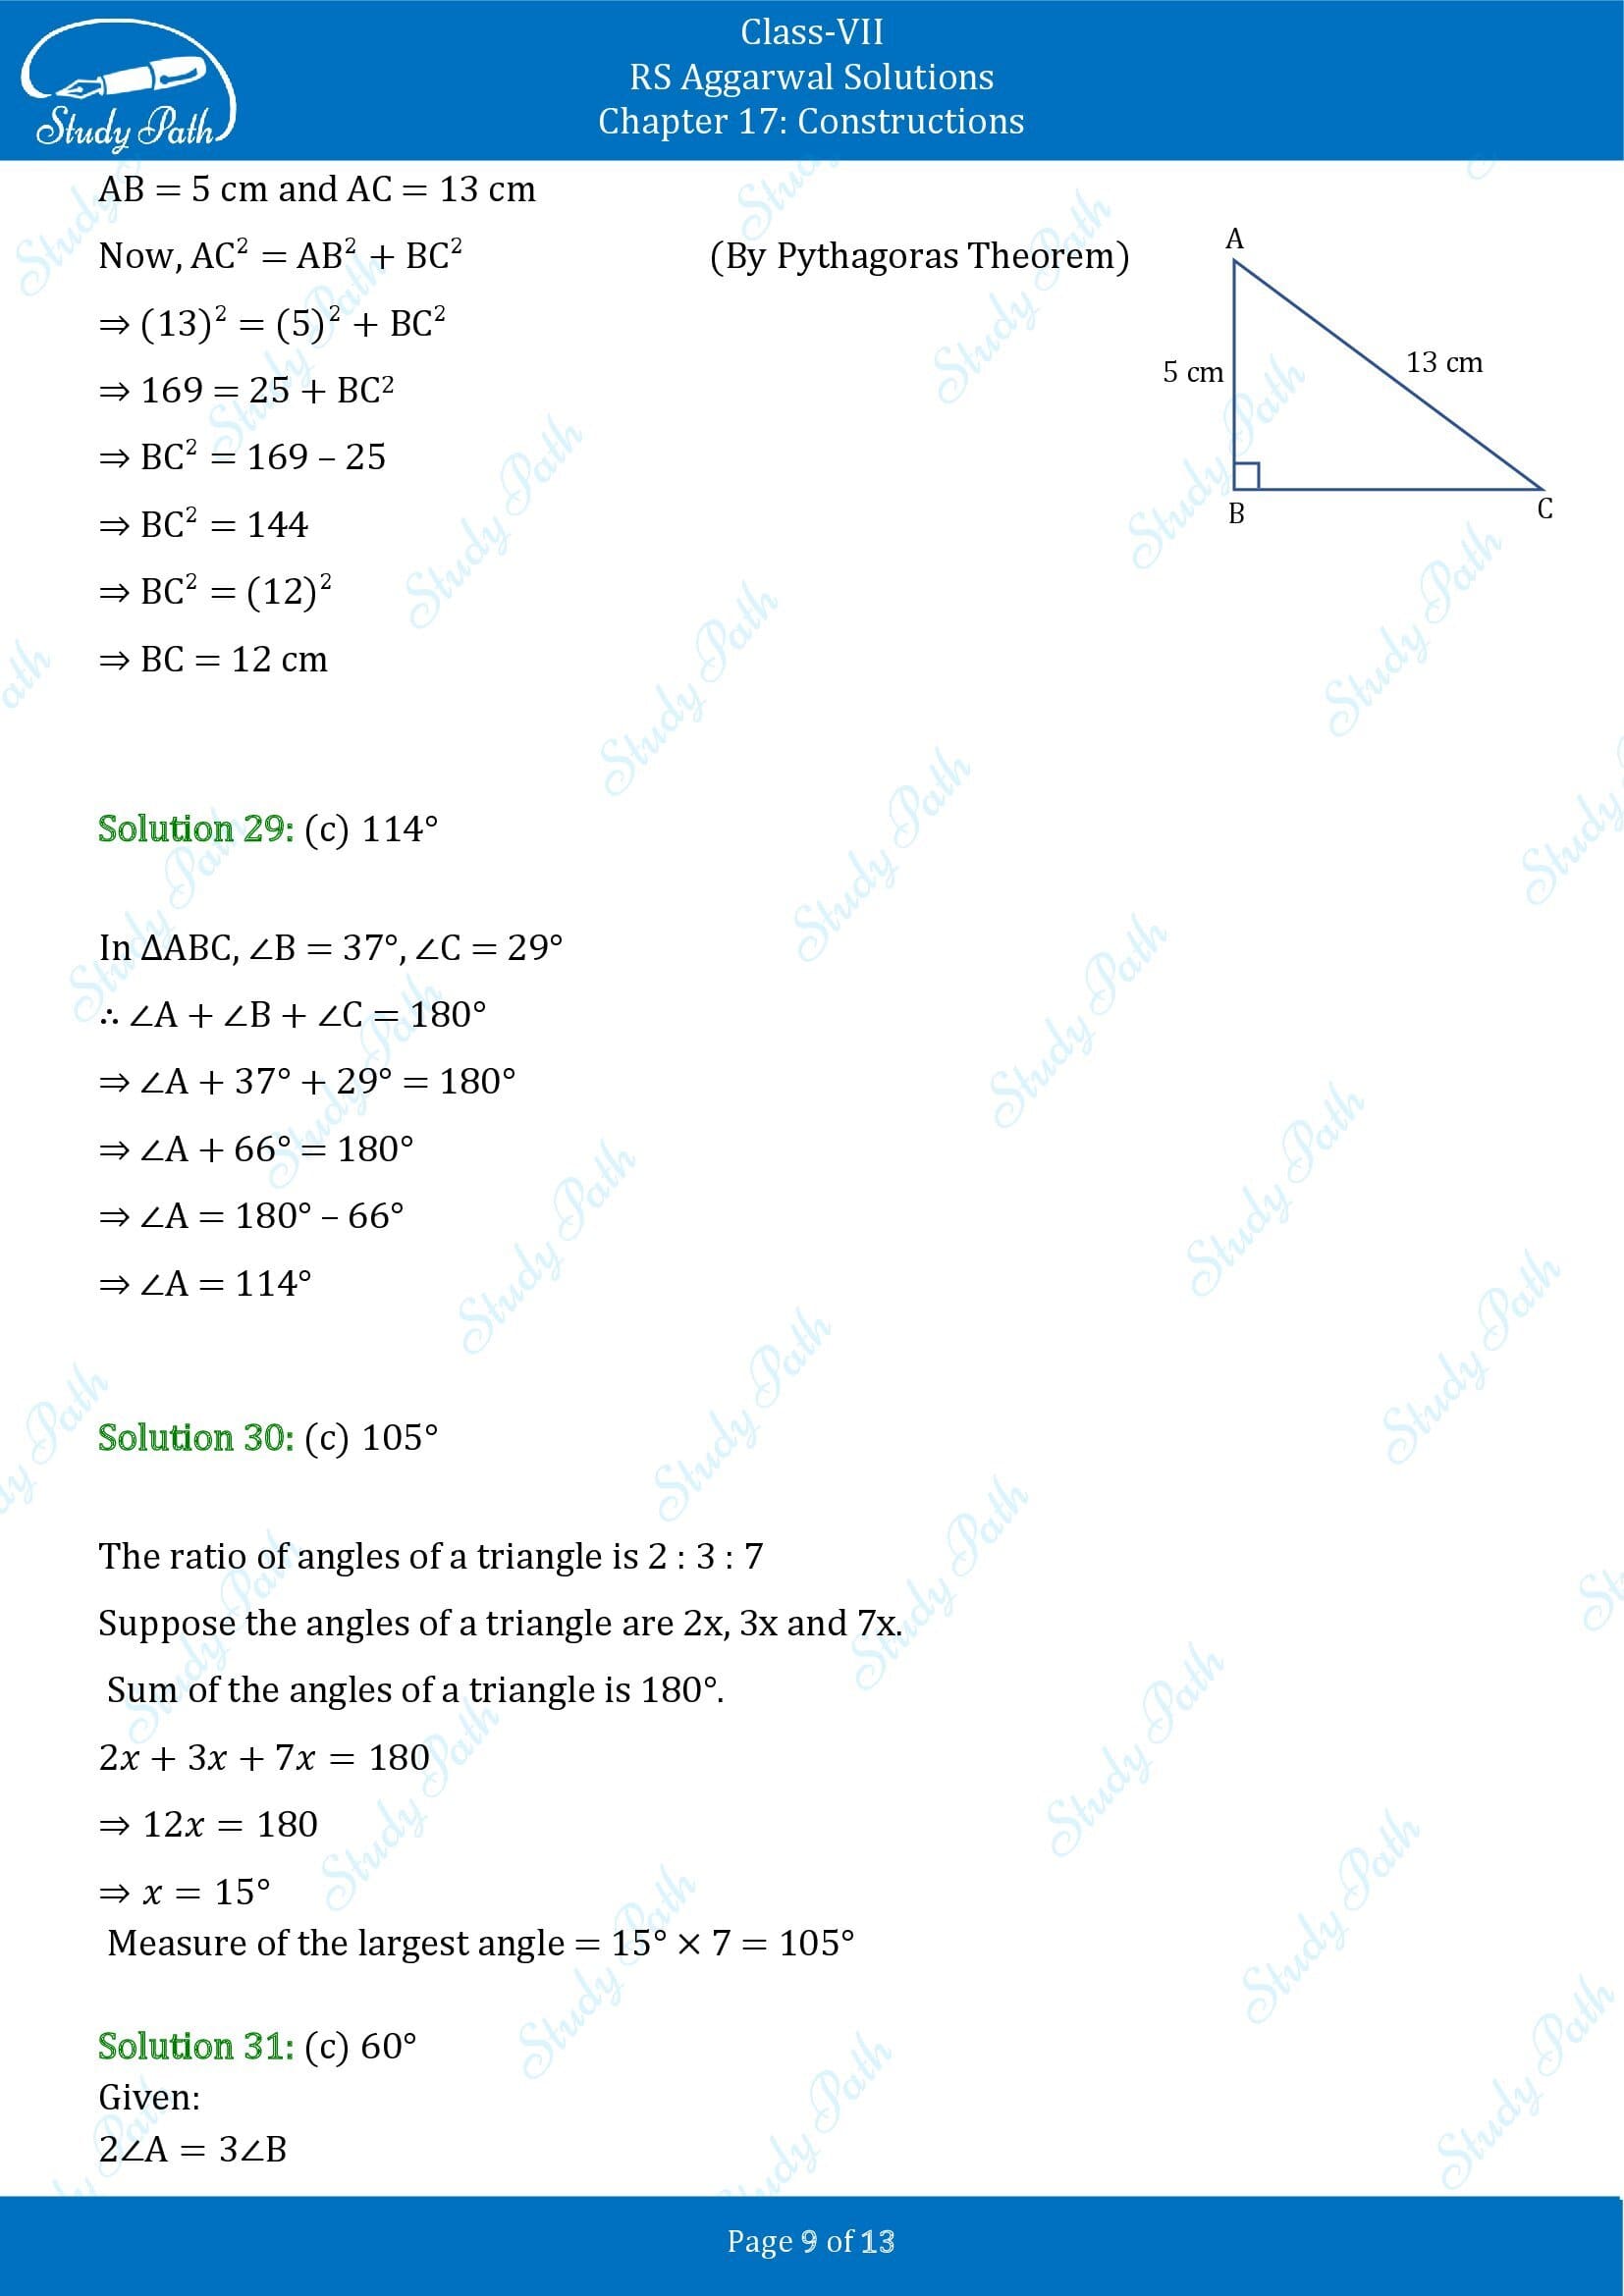 RS Aggarwal Solutions Class 7 Chapter 17 Constructions Exercise 17CMCQ 00009